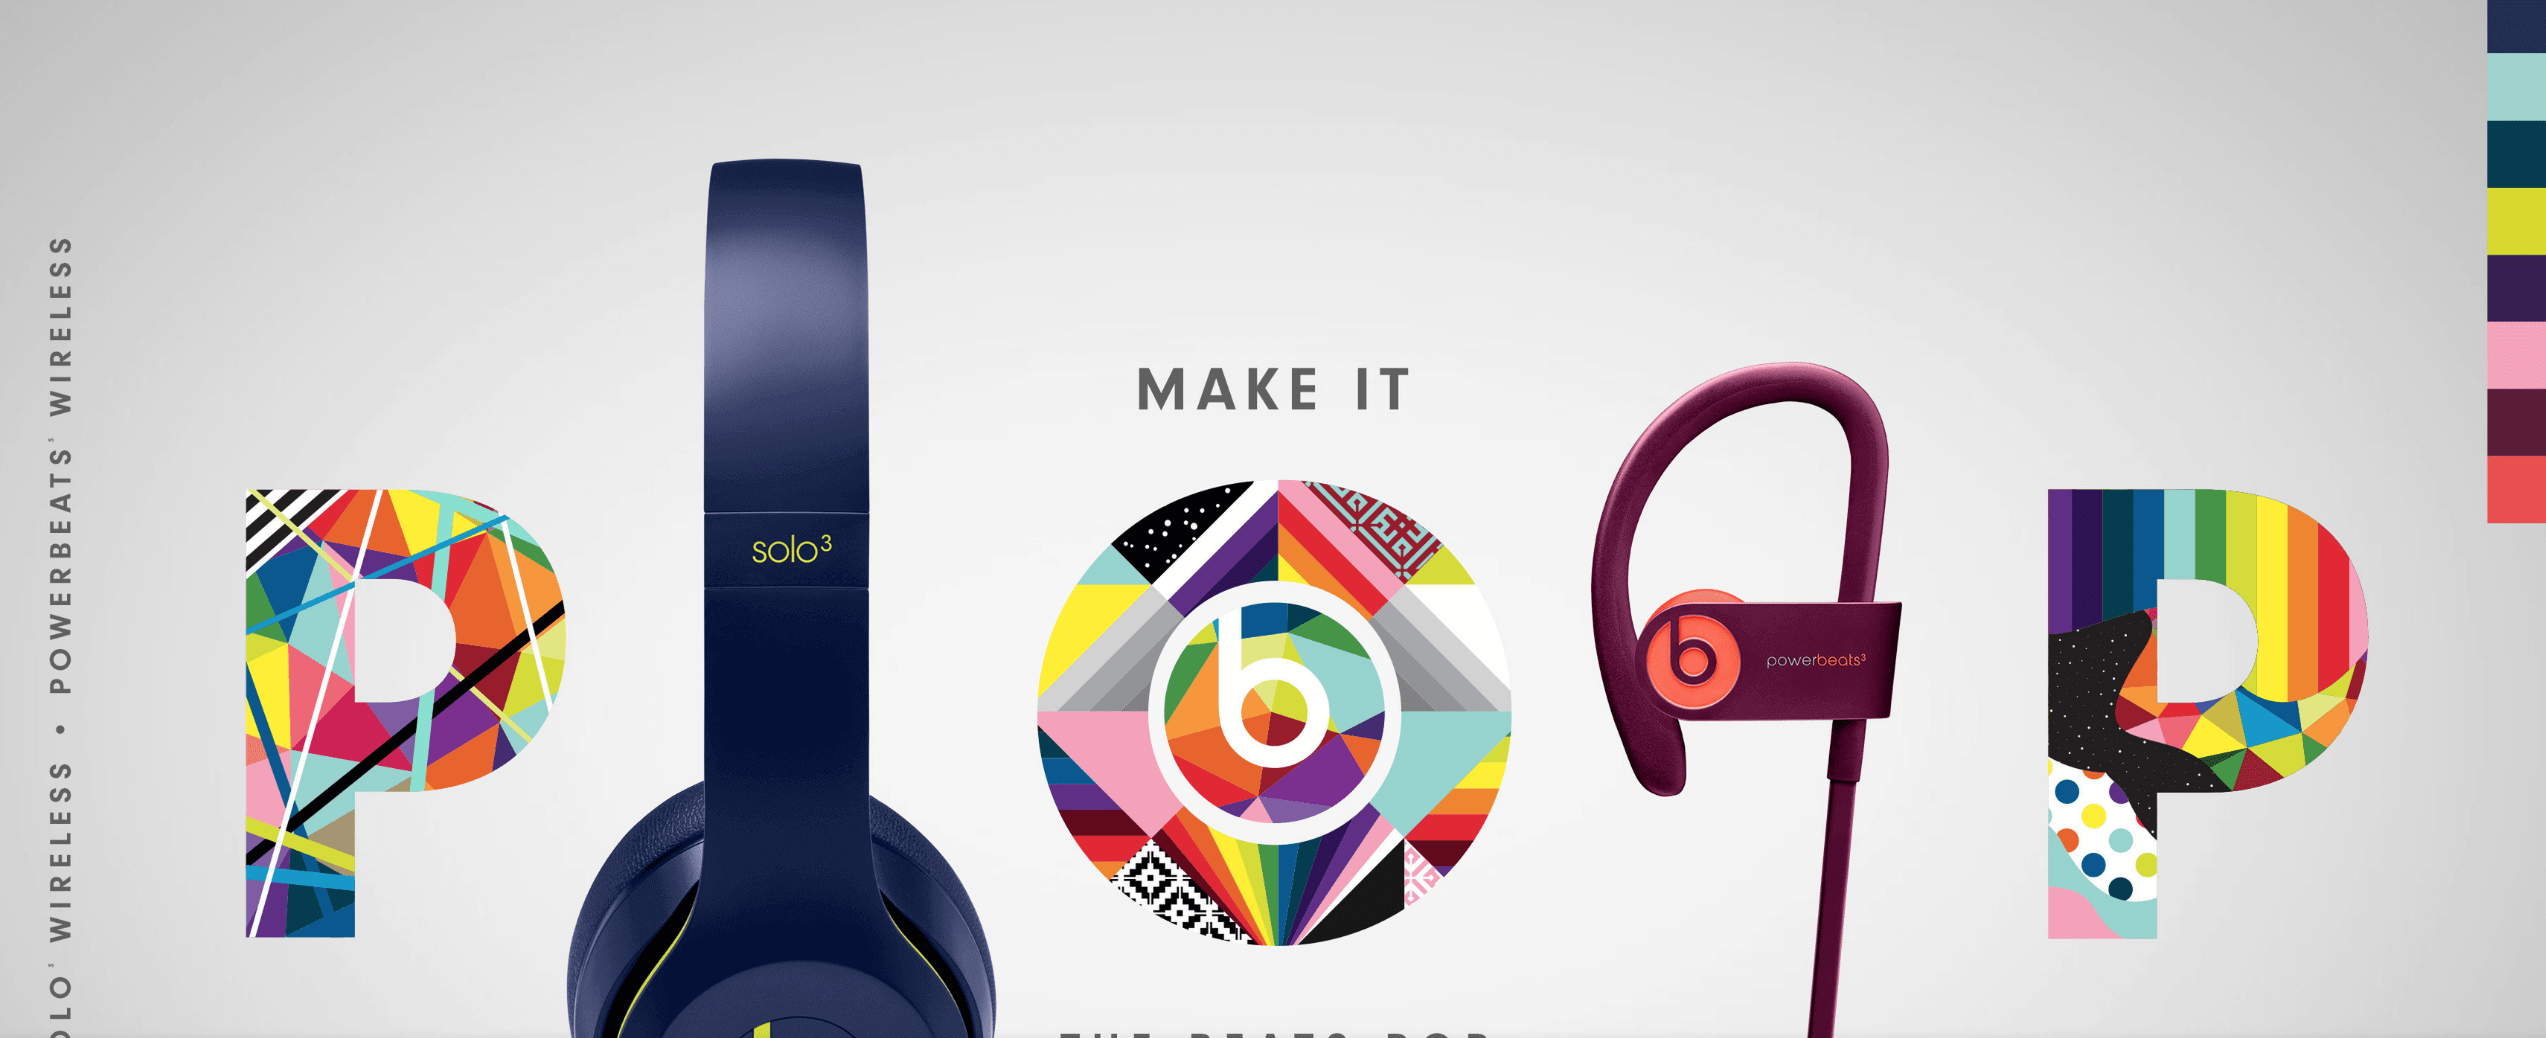 beats by dre, brand story